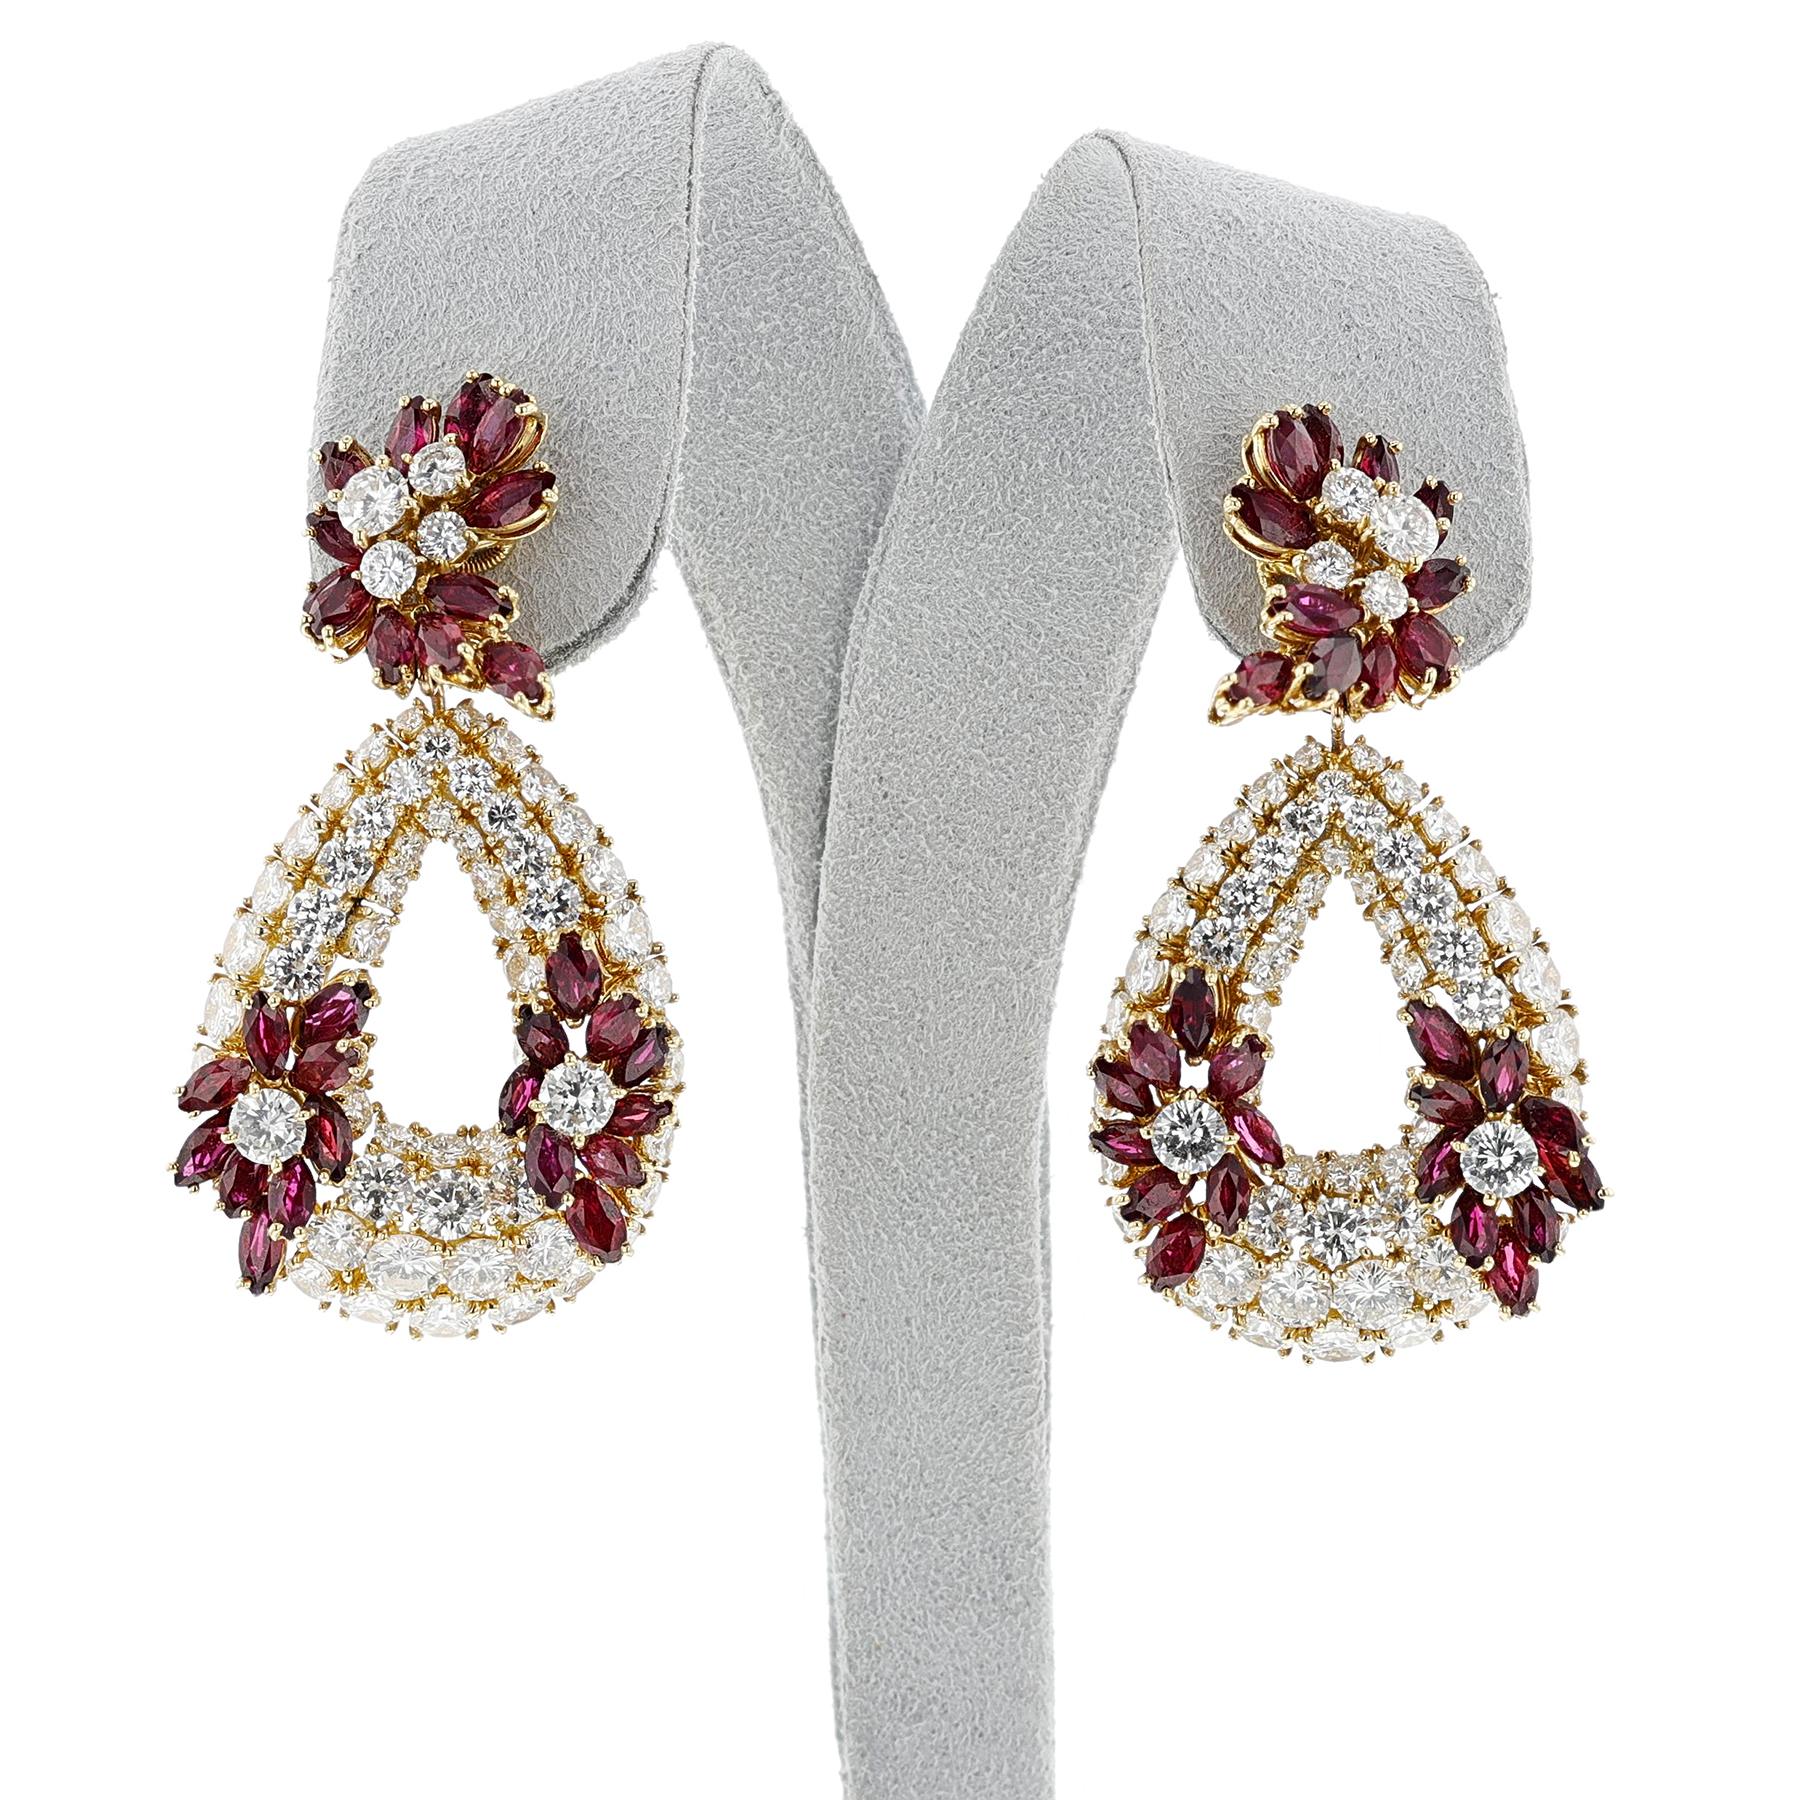 Mixed Cut Piaget Ruby and Diamond Necklace and Earring Set